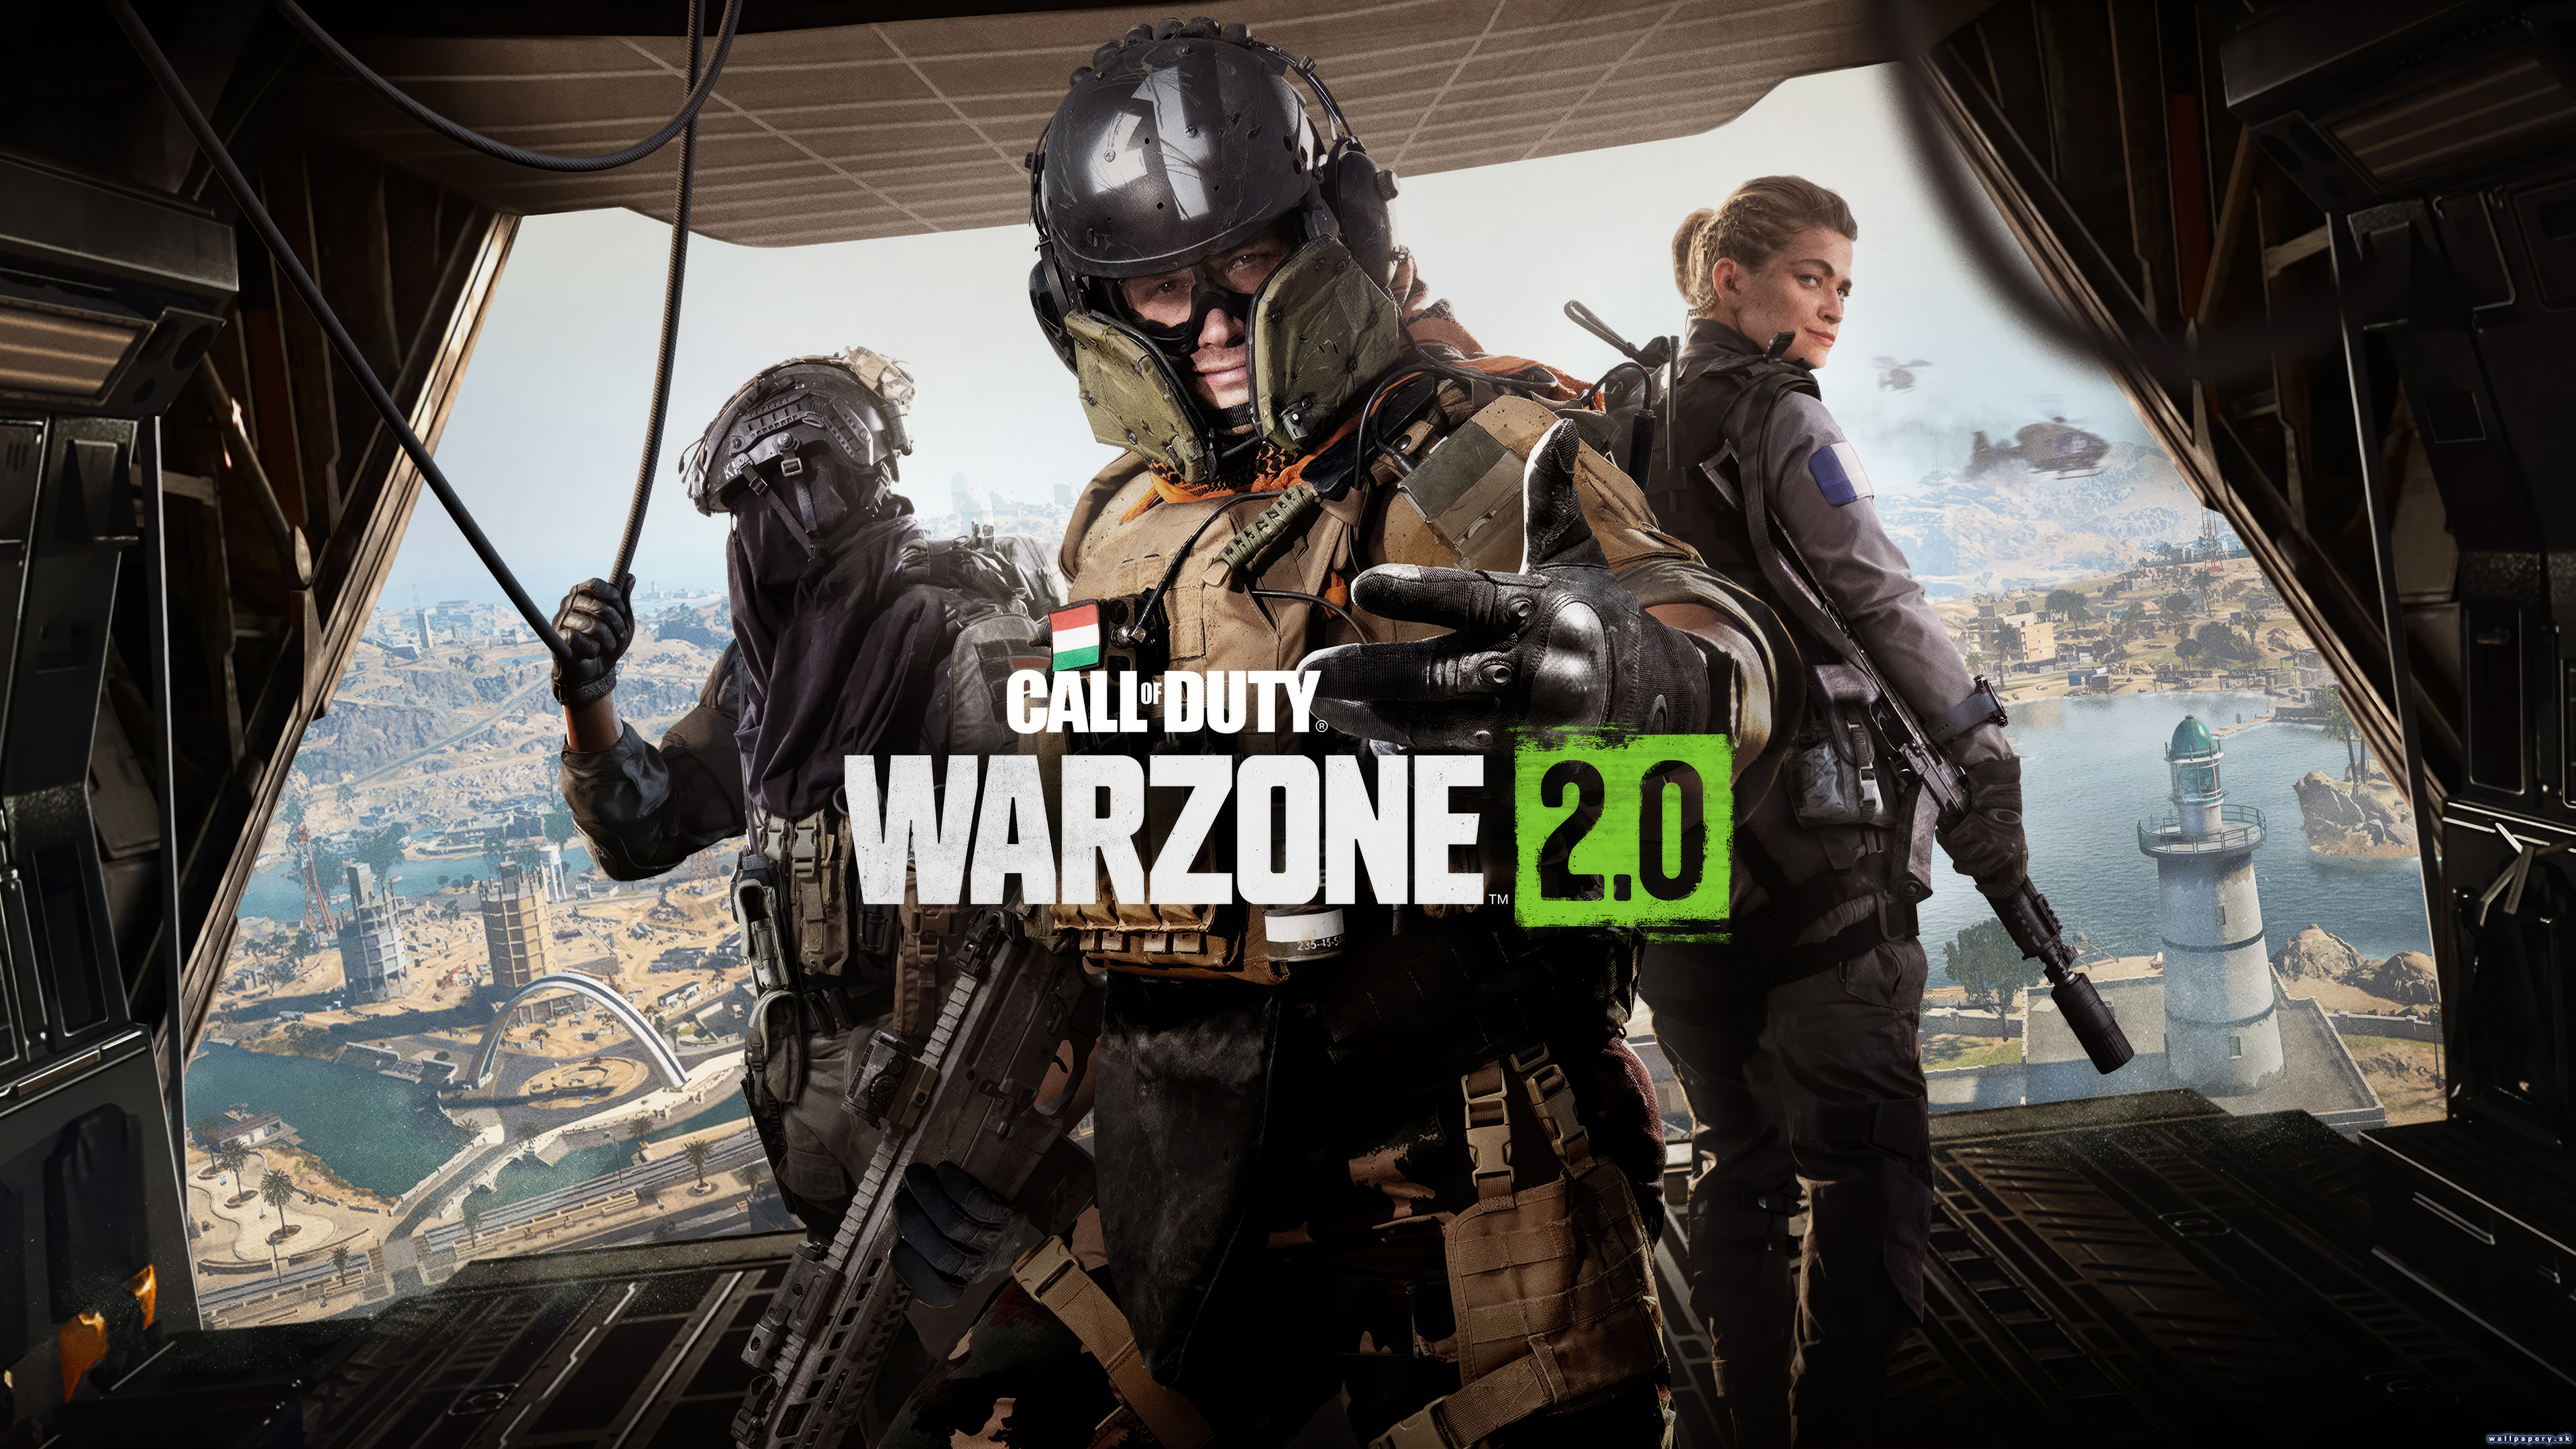 Call of Duty: Warzone 2.0 - wallpaper 1